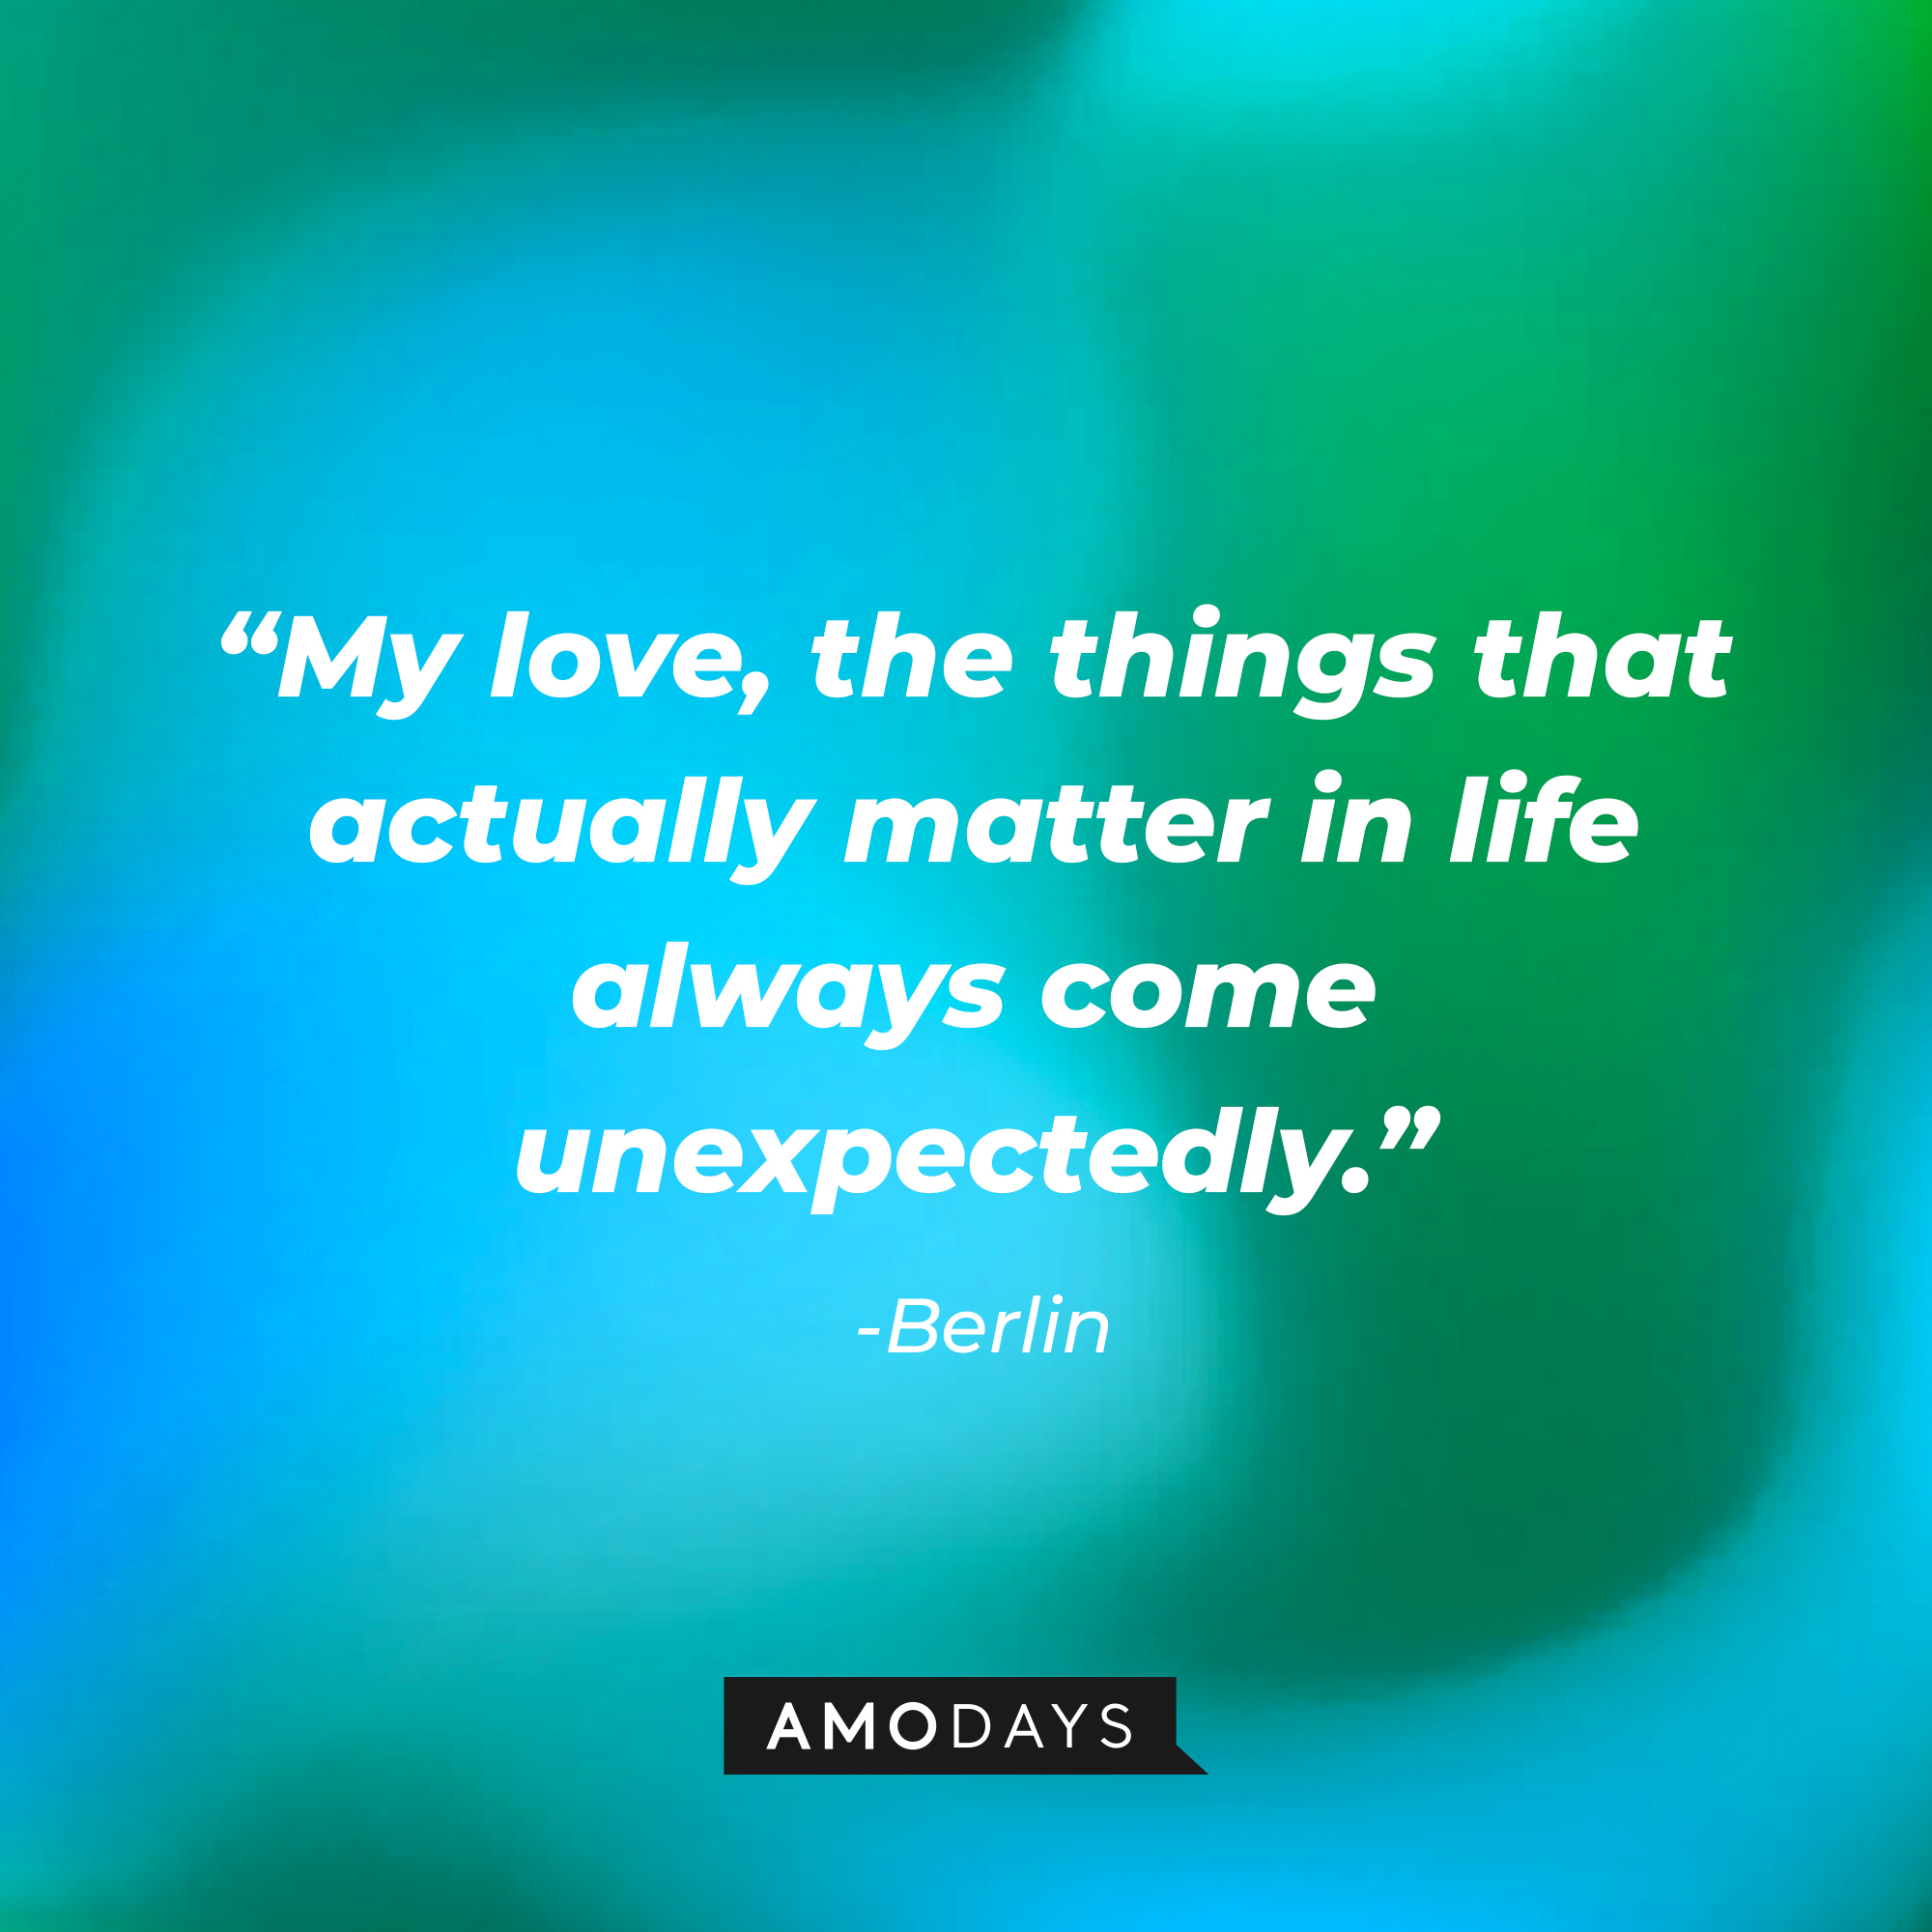 Berlin’s  quote: “My love, the things that actually matter in life always come unexpectedly.” | Source: AmoDays